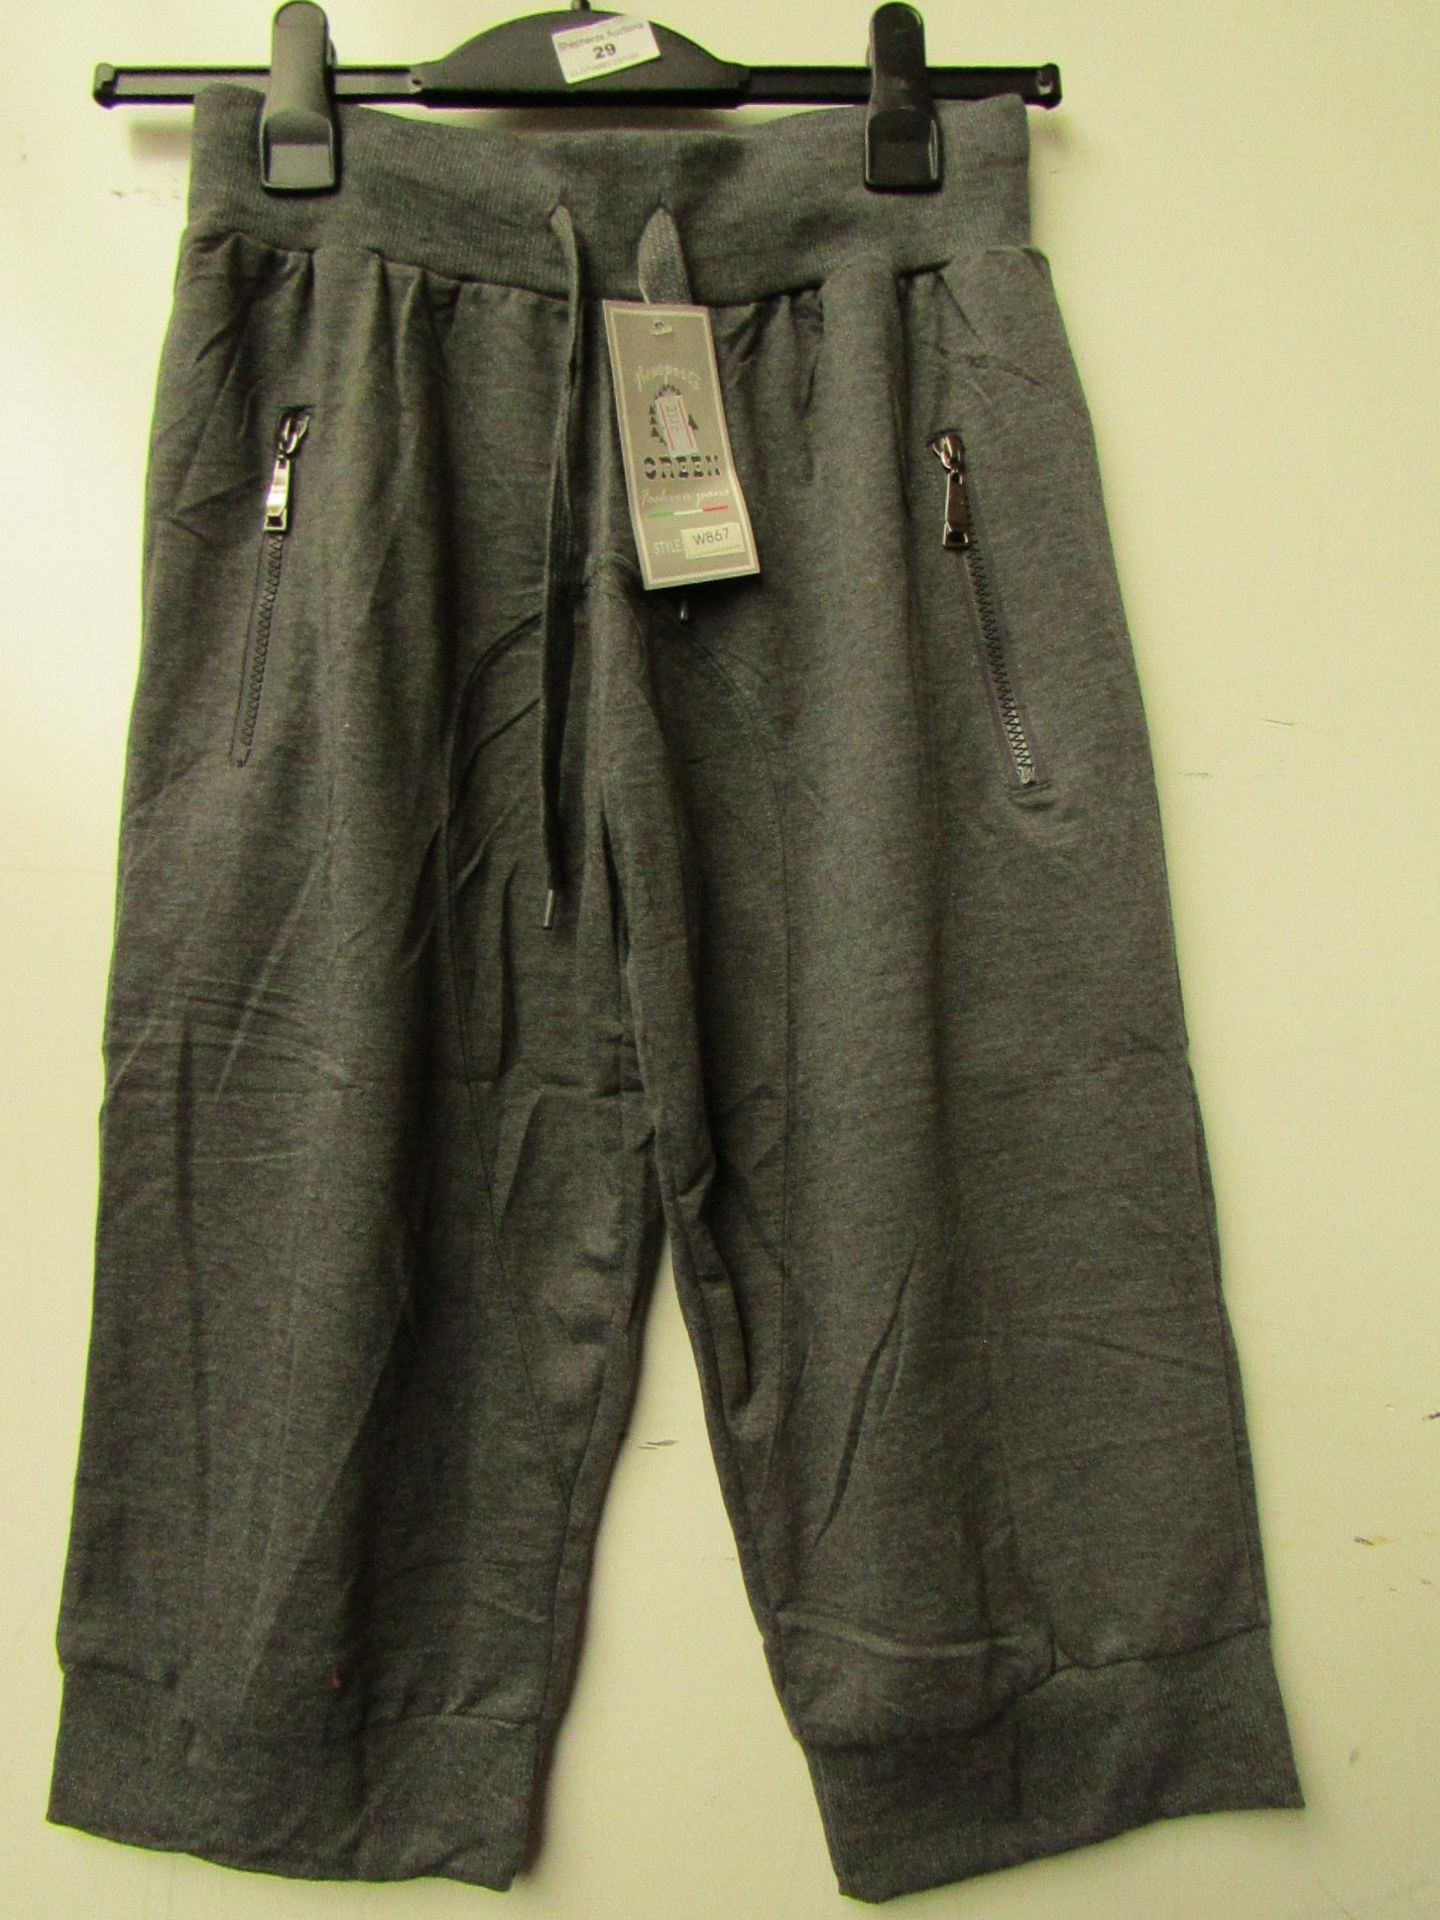 Green Jeans Grey Shorts. Size XL. New with tags